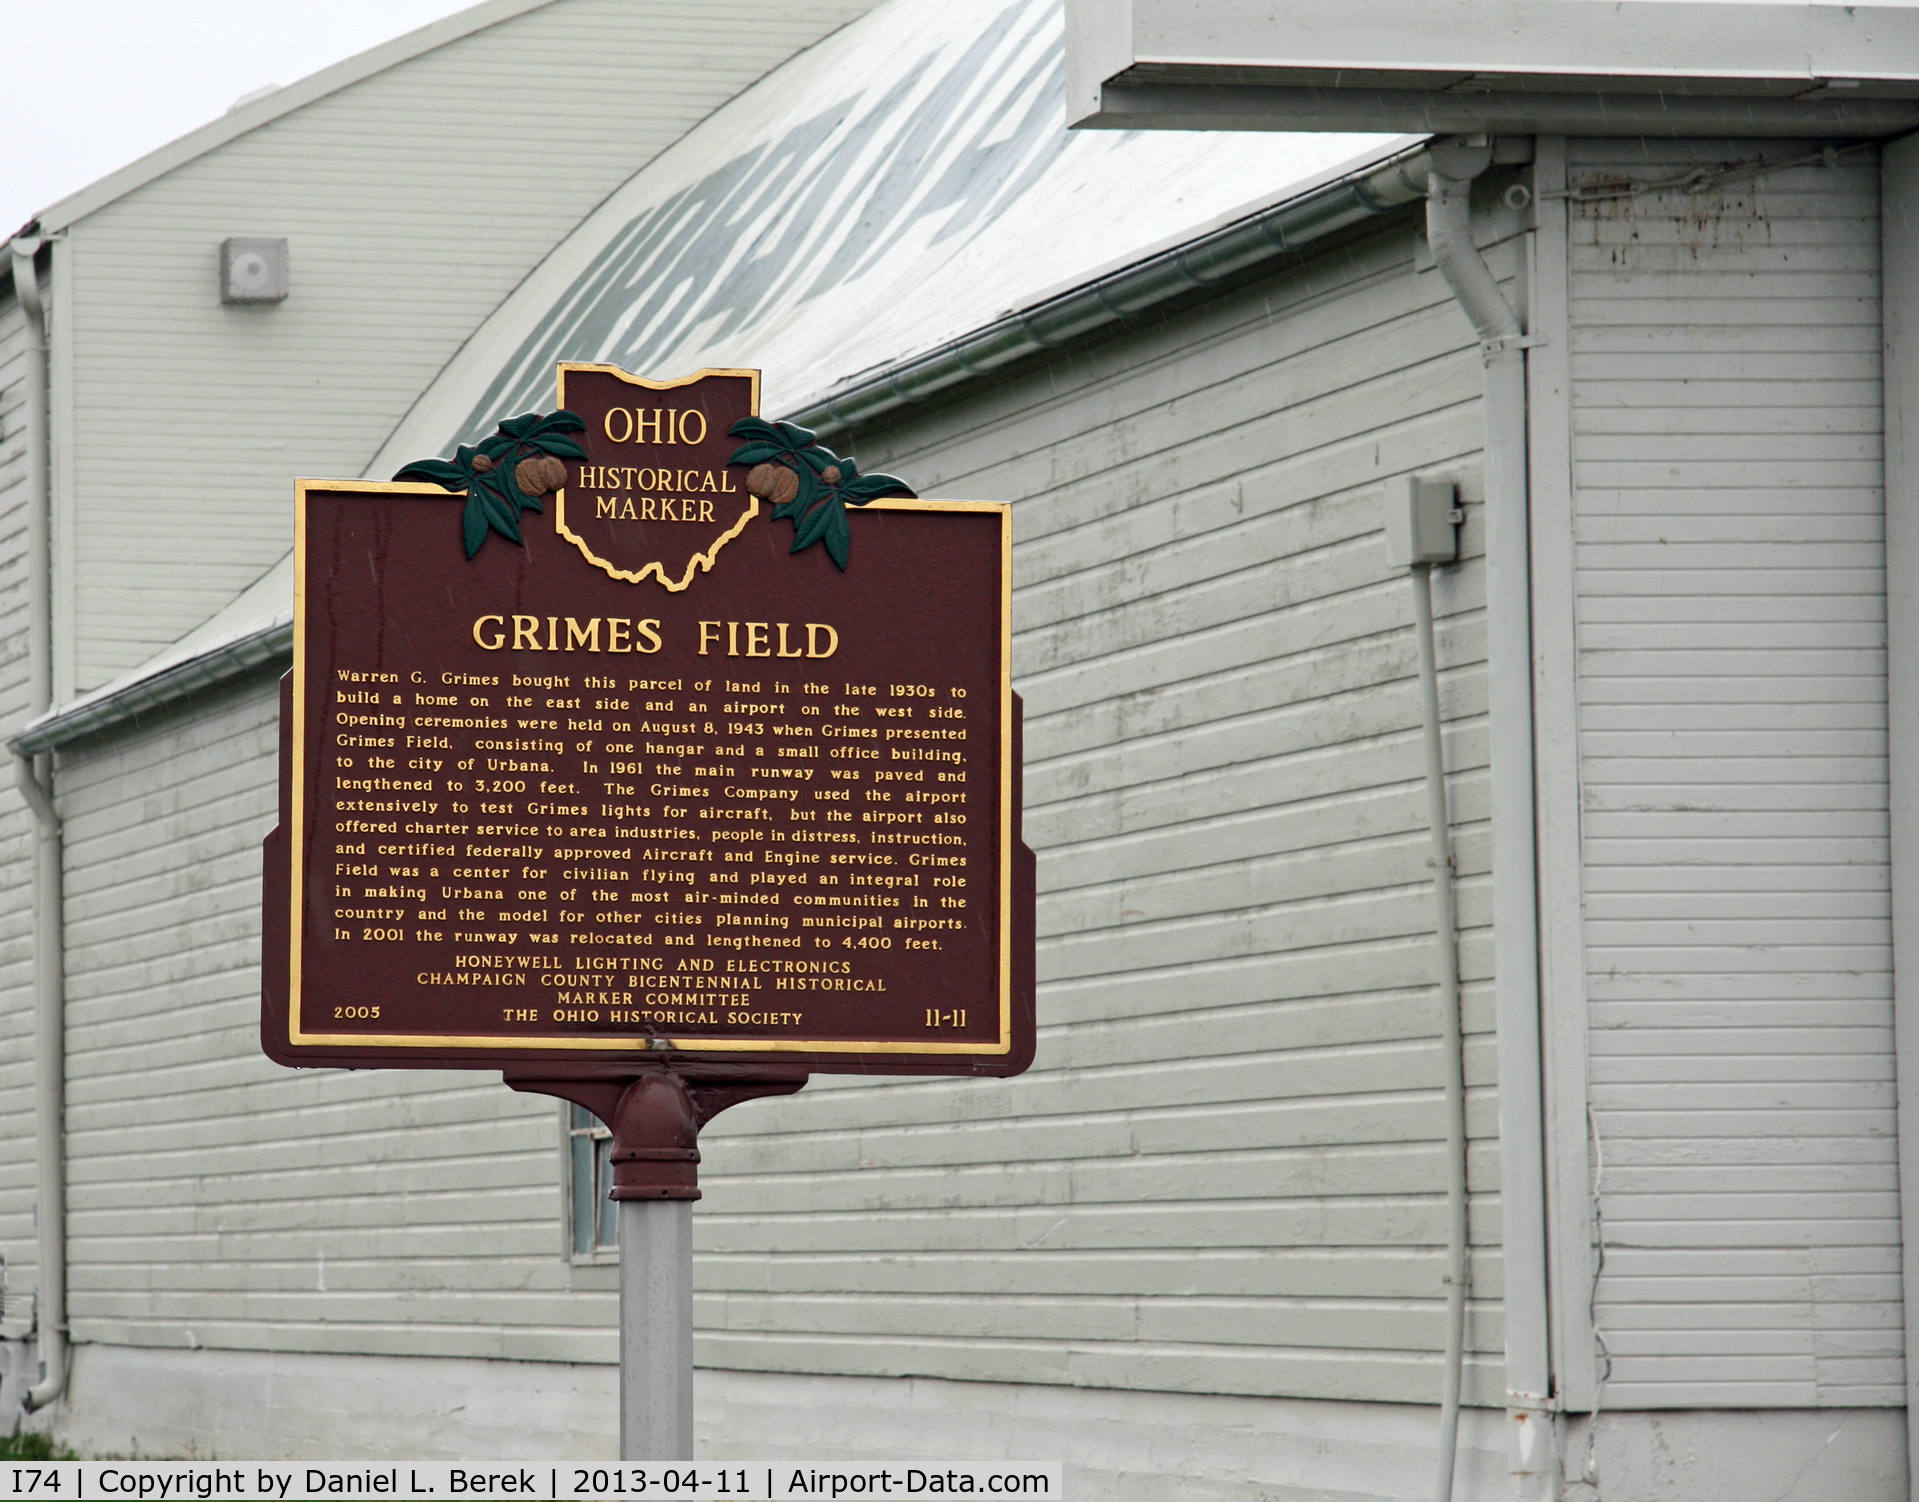 Grimes Field Airport (I74) - This marker details the very interesting history of Grimes Field. 